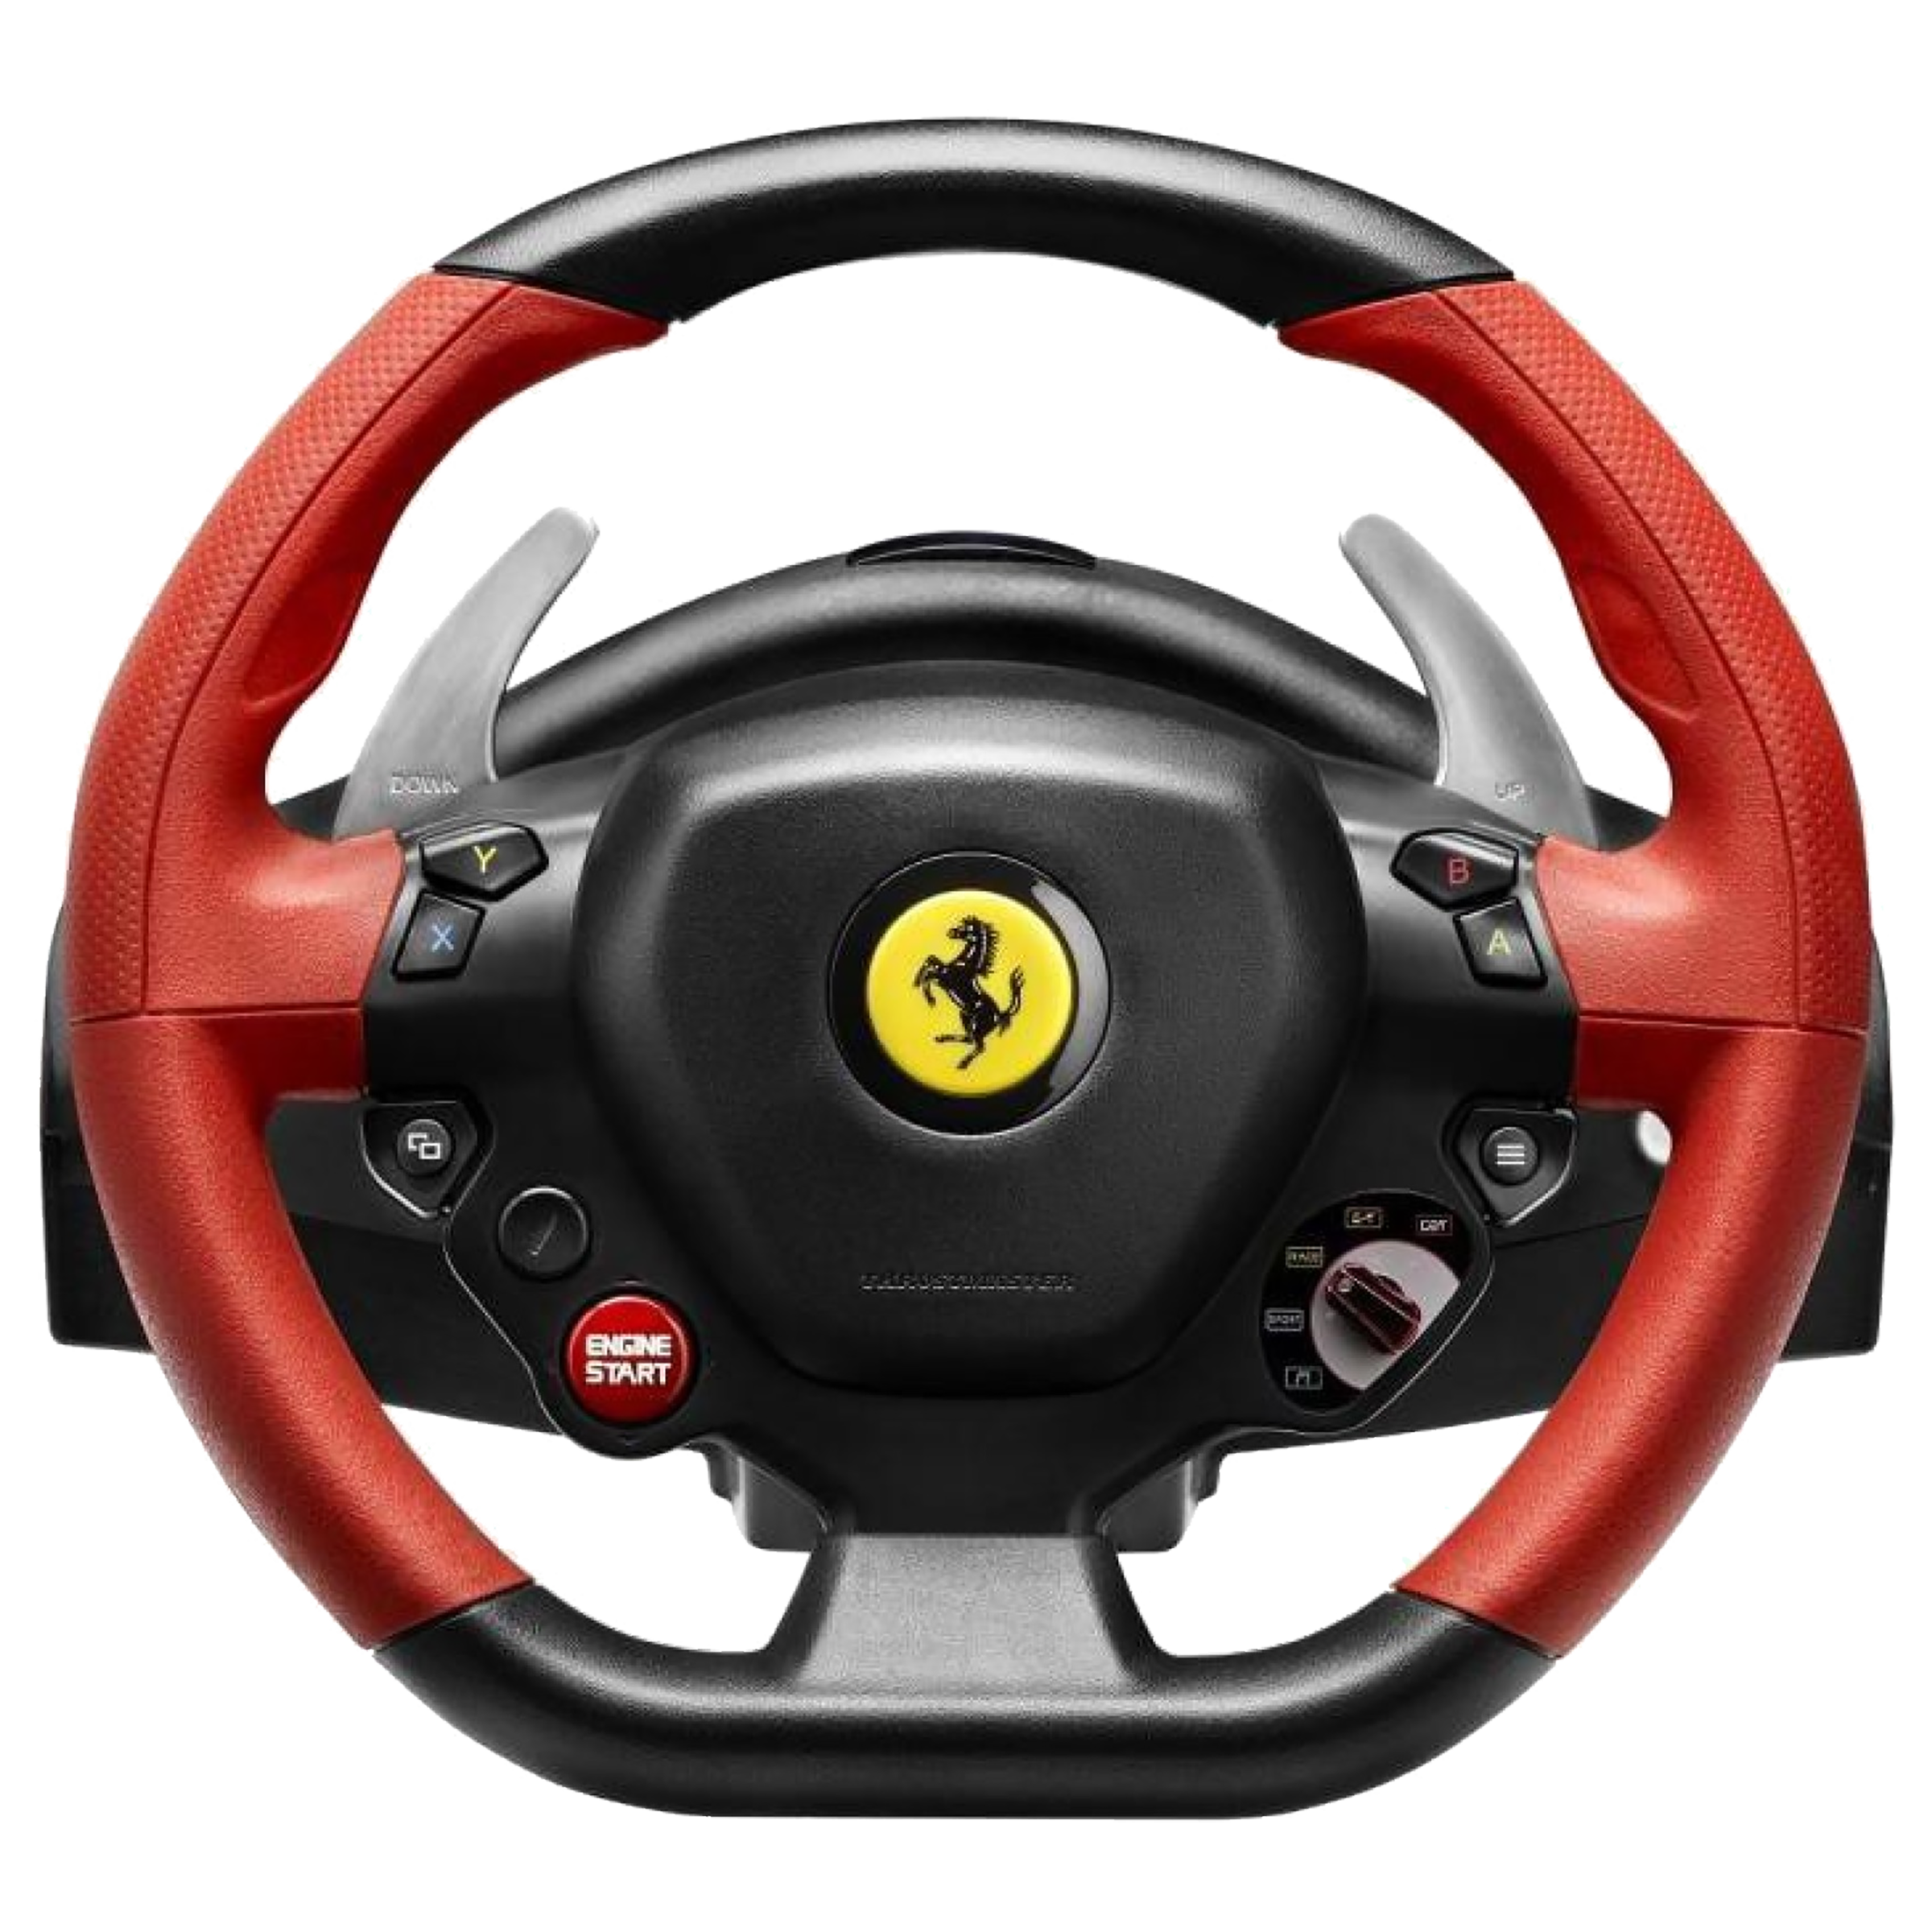 Thrustmaster Ferrari 458 Spider Racing Wheel For Xbox One (Bungee Cord Mechanism, Red/Black)_1